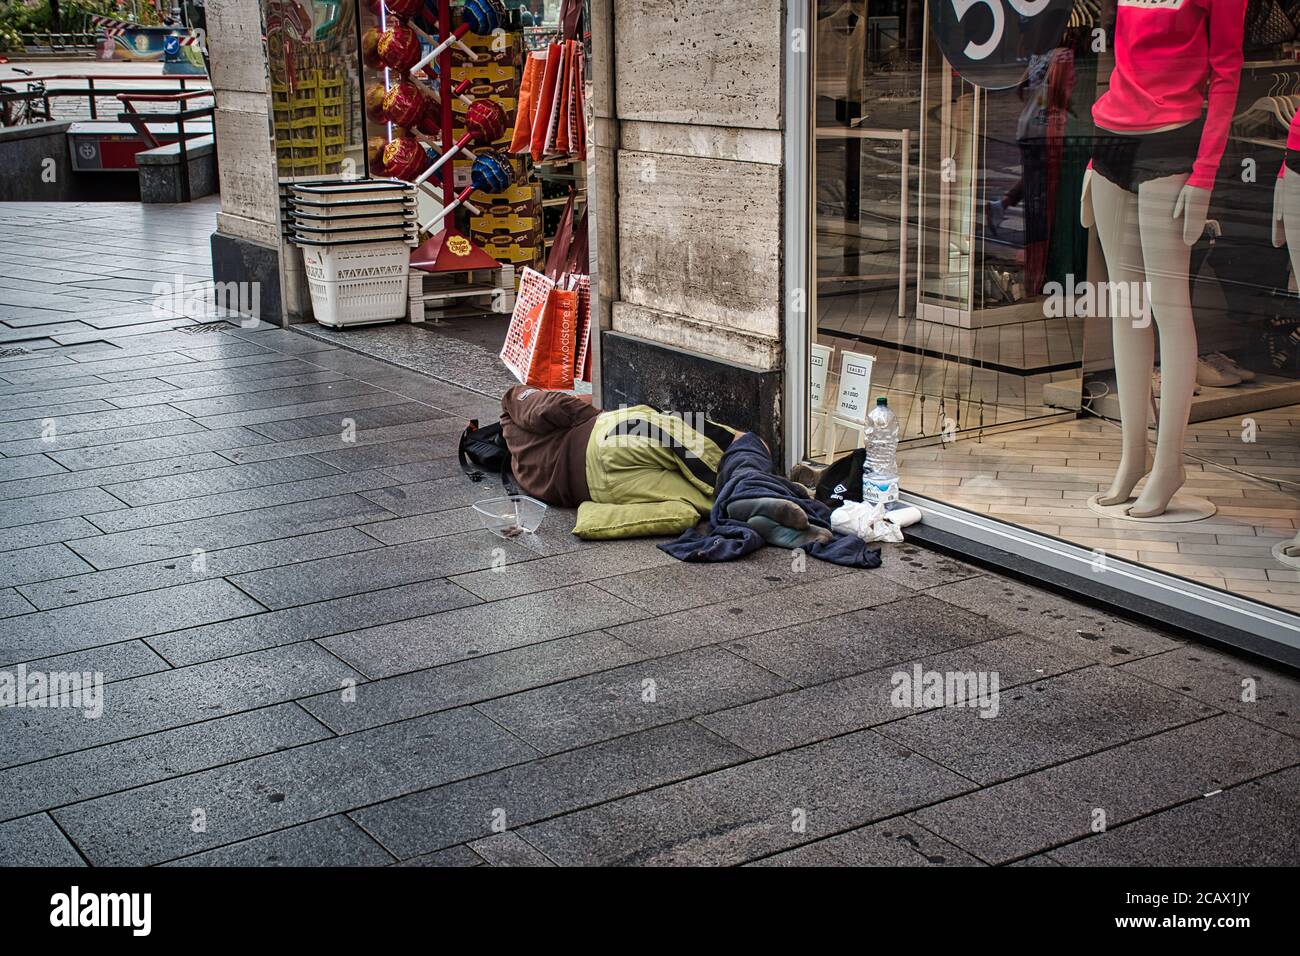 Milan, Italy 08.08.2020: Homeless people on the streets of Milan Stock Photo